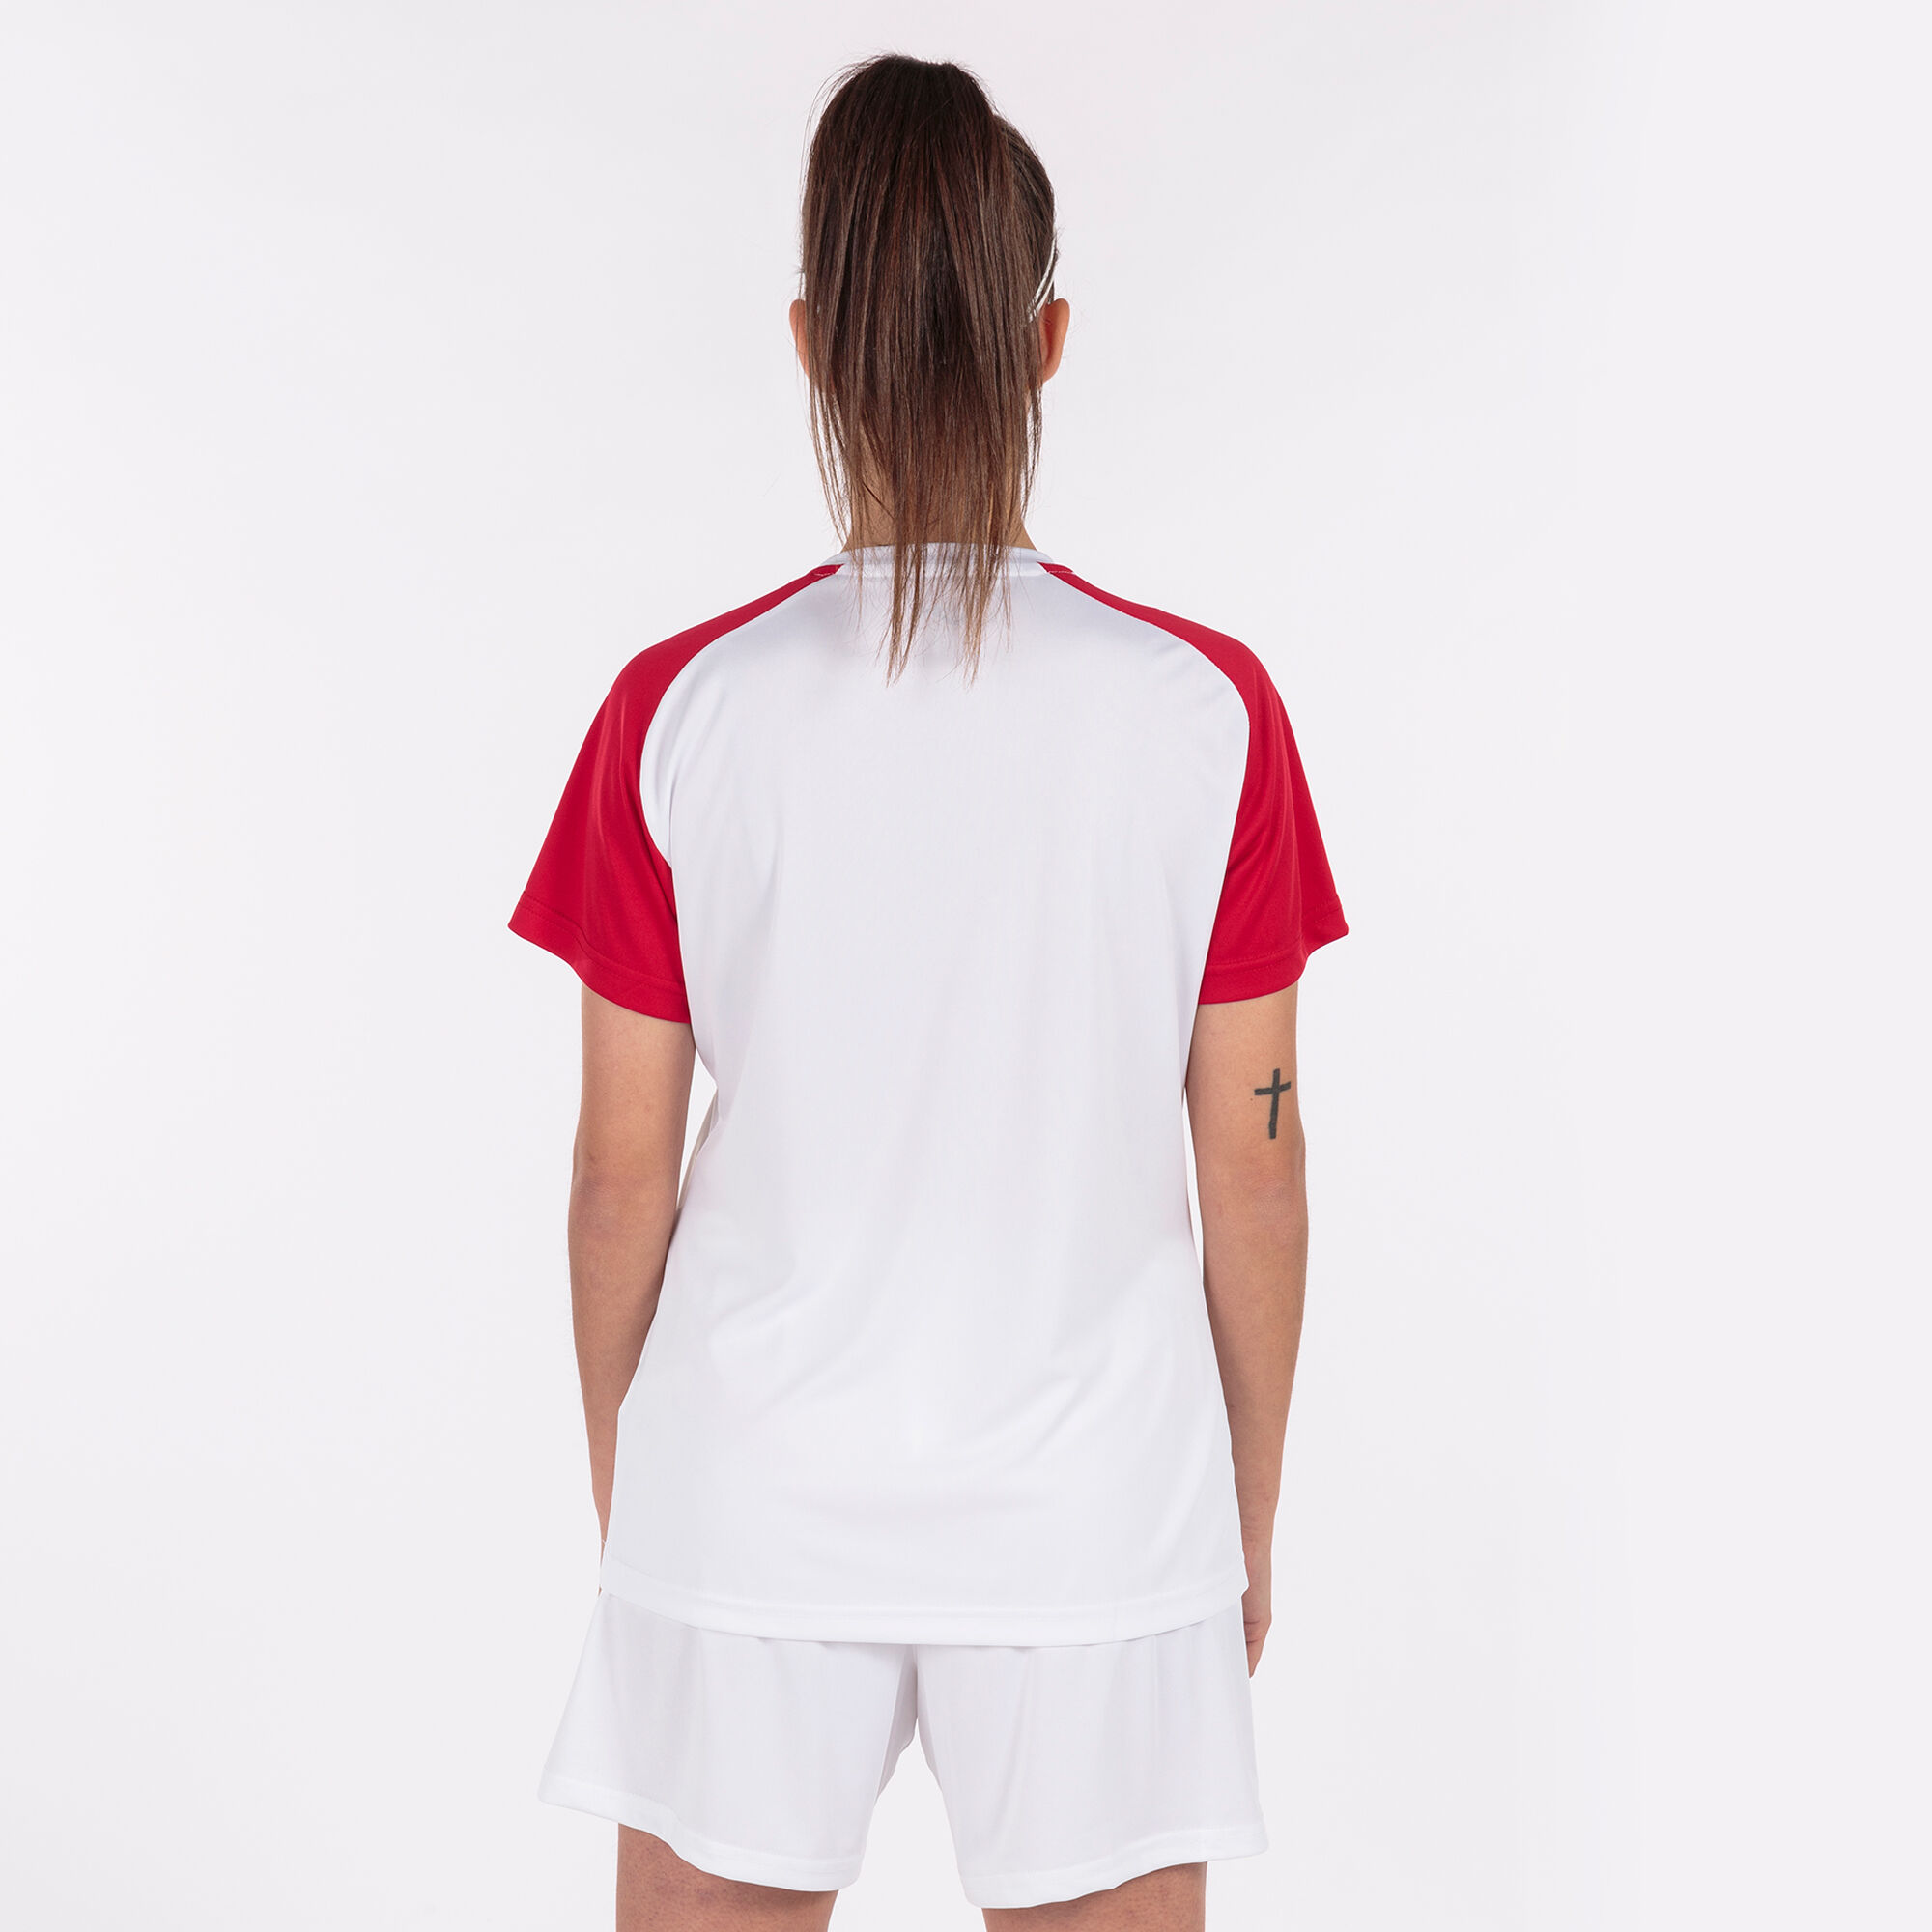 SHIRT SHORT SLEEVE WOMAN ACADEMY IV WHITE RED